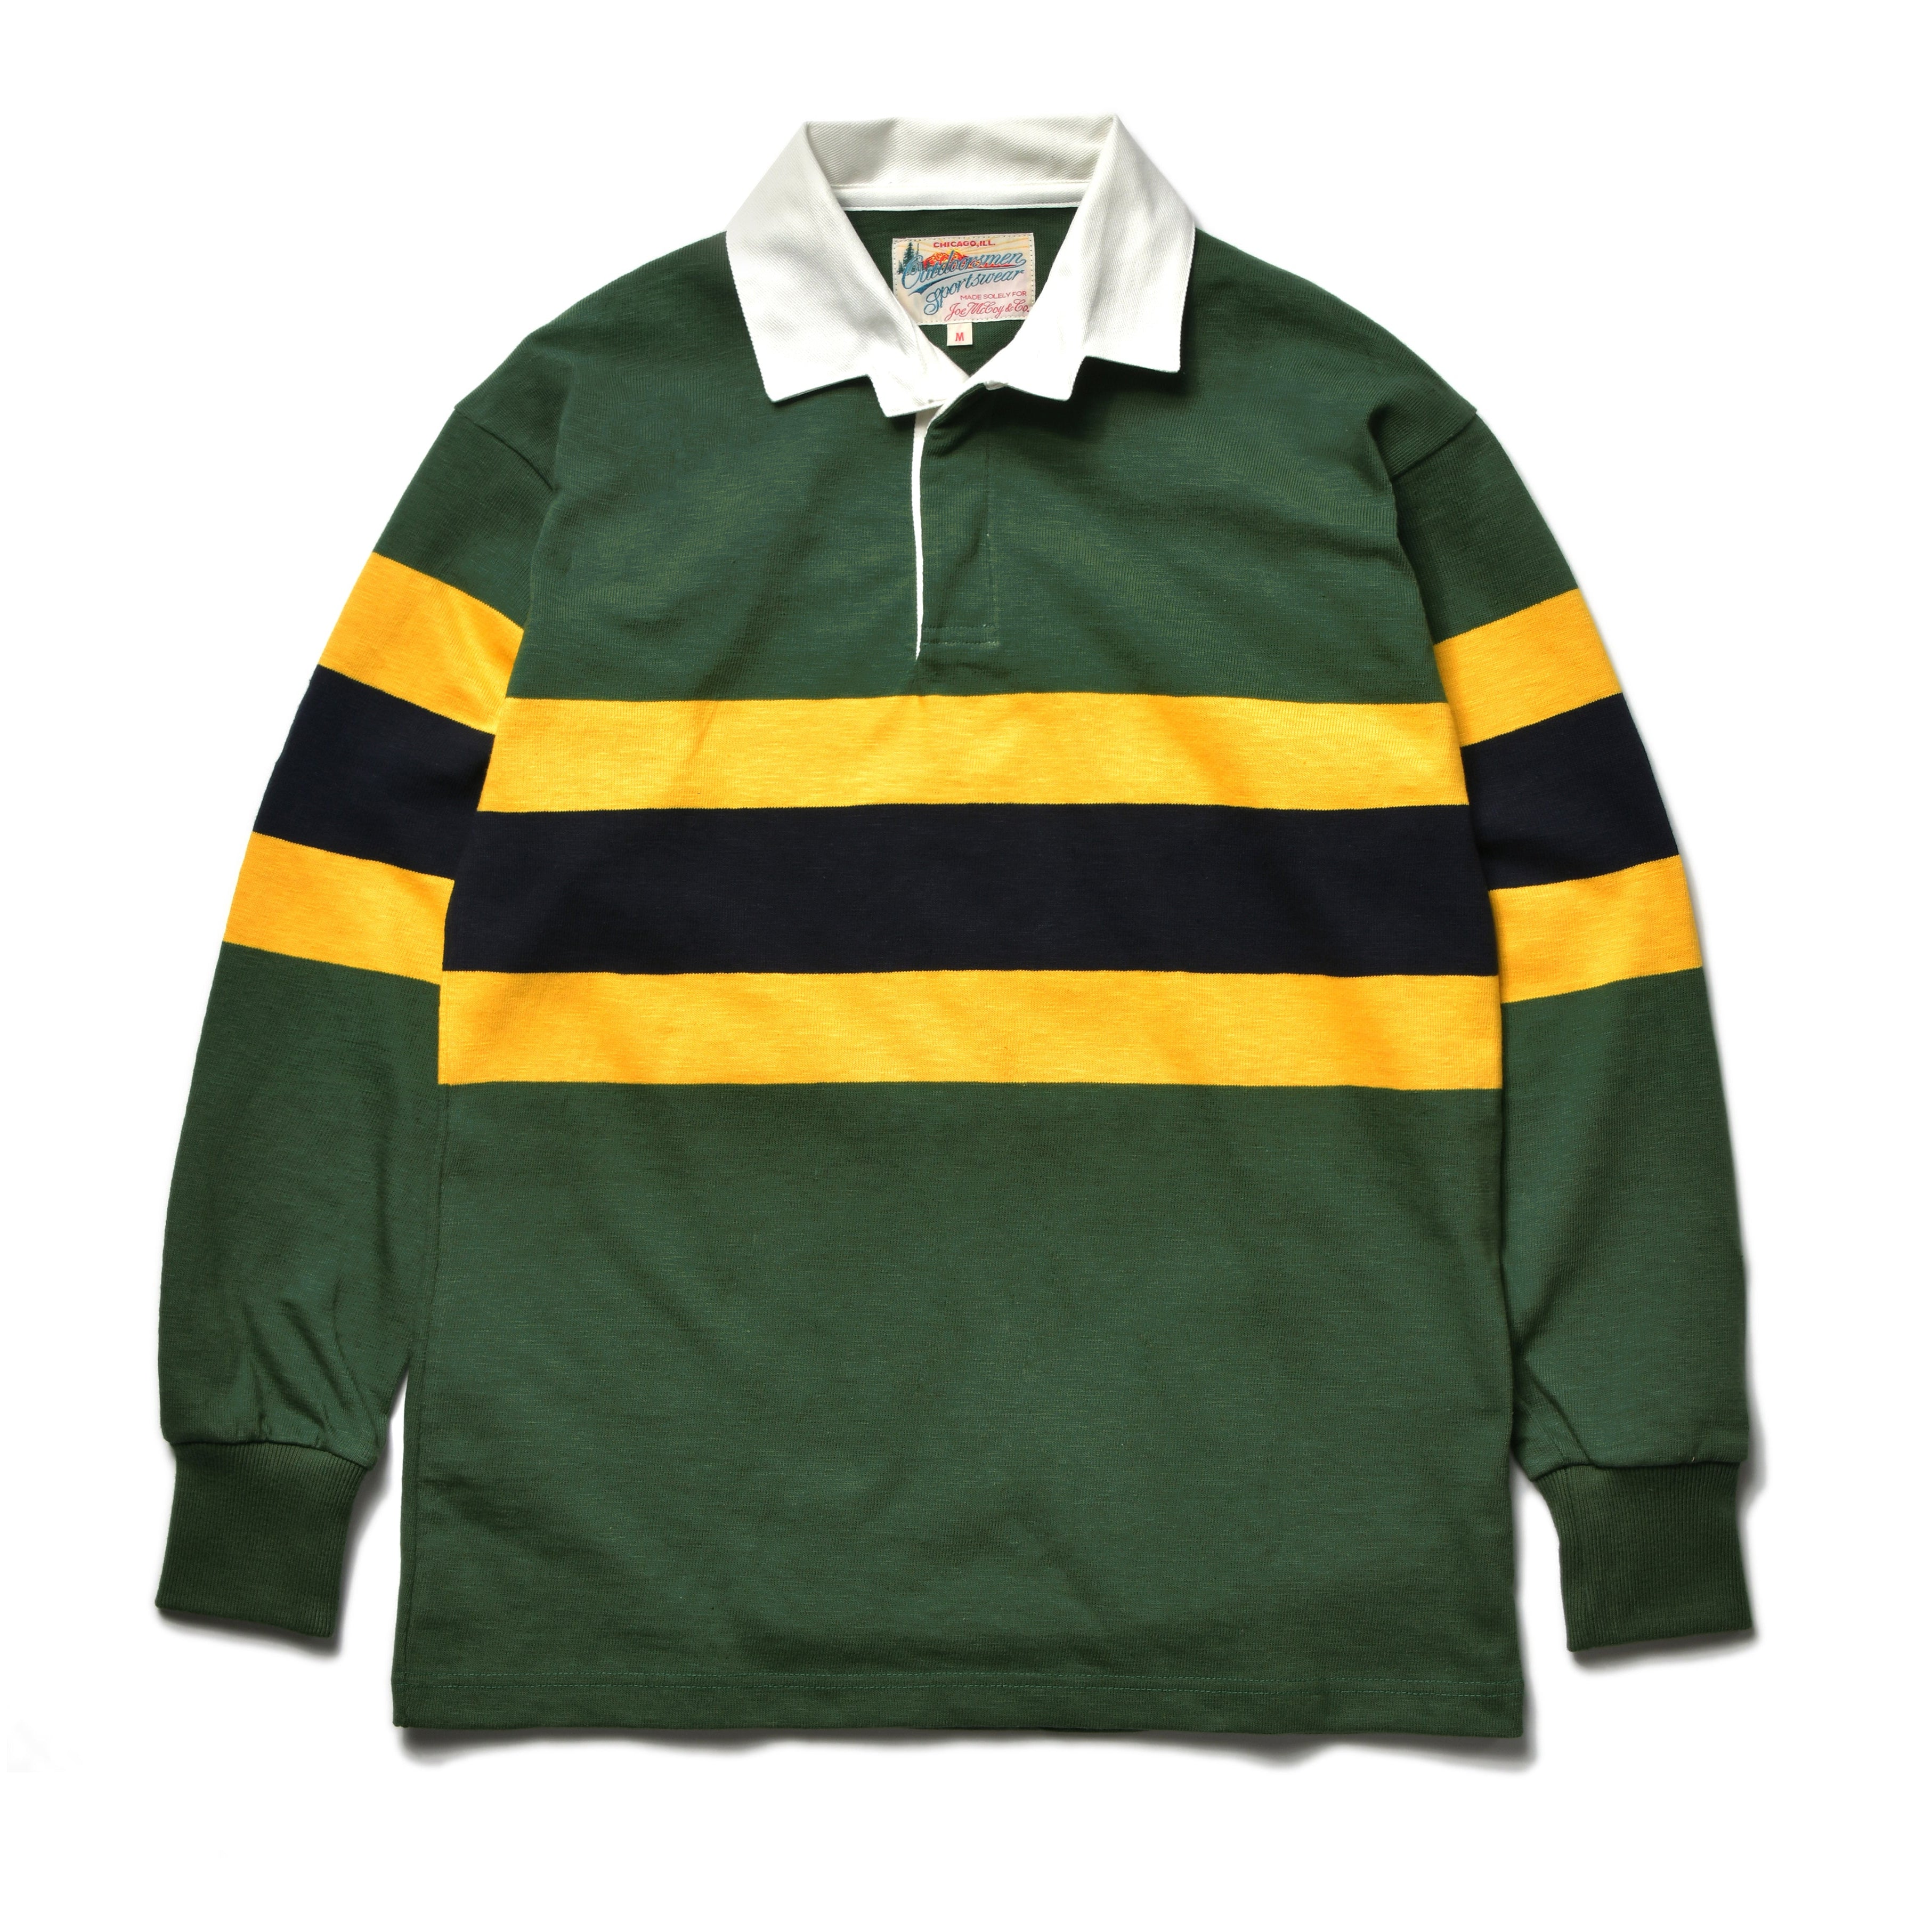 CLIMBERS' STRIPED RUGBY SHIRT – The Real McCoy's